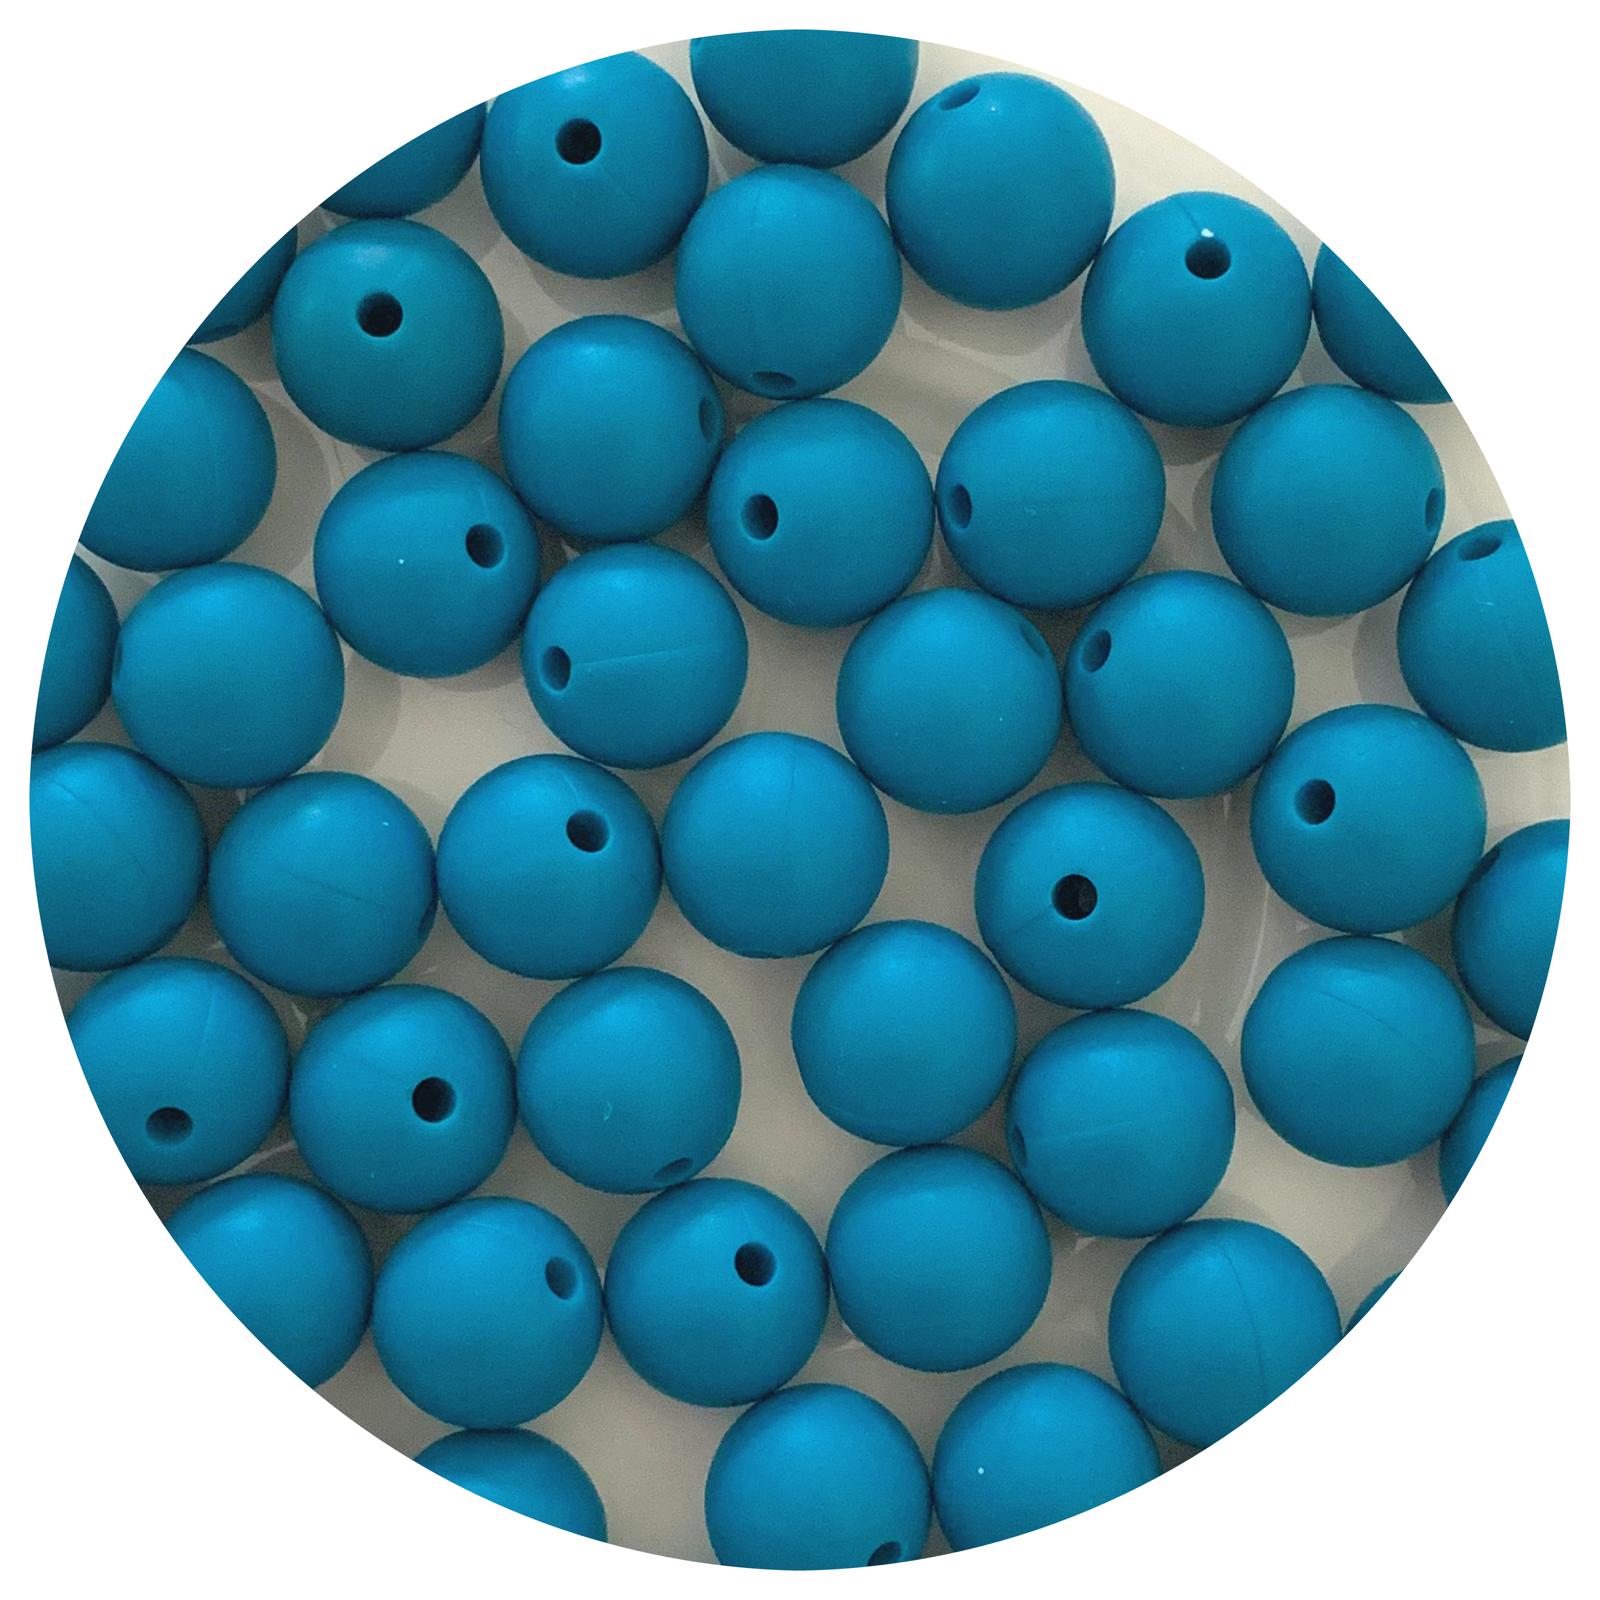 Teal - 12mm Round Silicone Beads - 10 beads